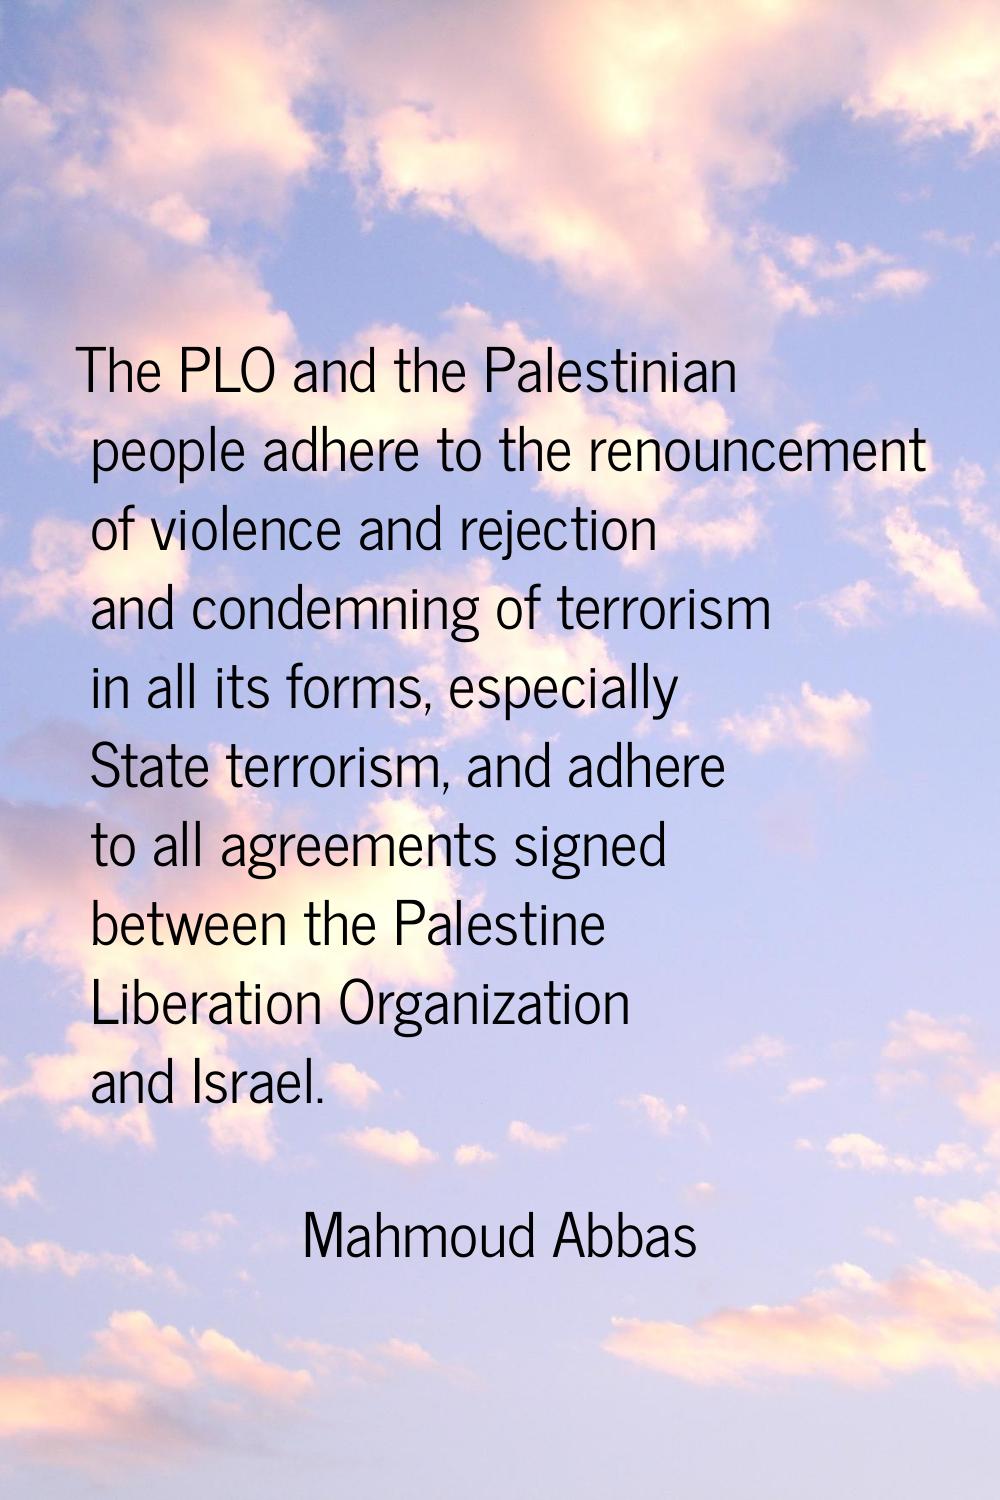 The PLO and the Palestinian people adhere to the renouncement of violence and rejection and condemn